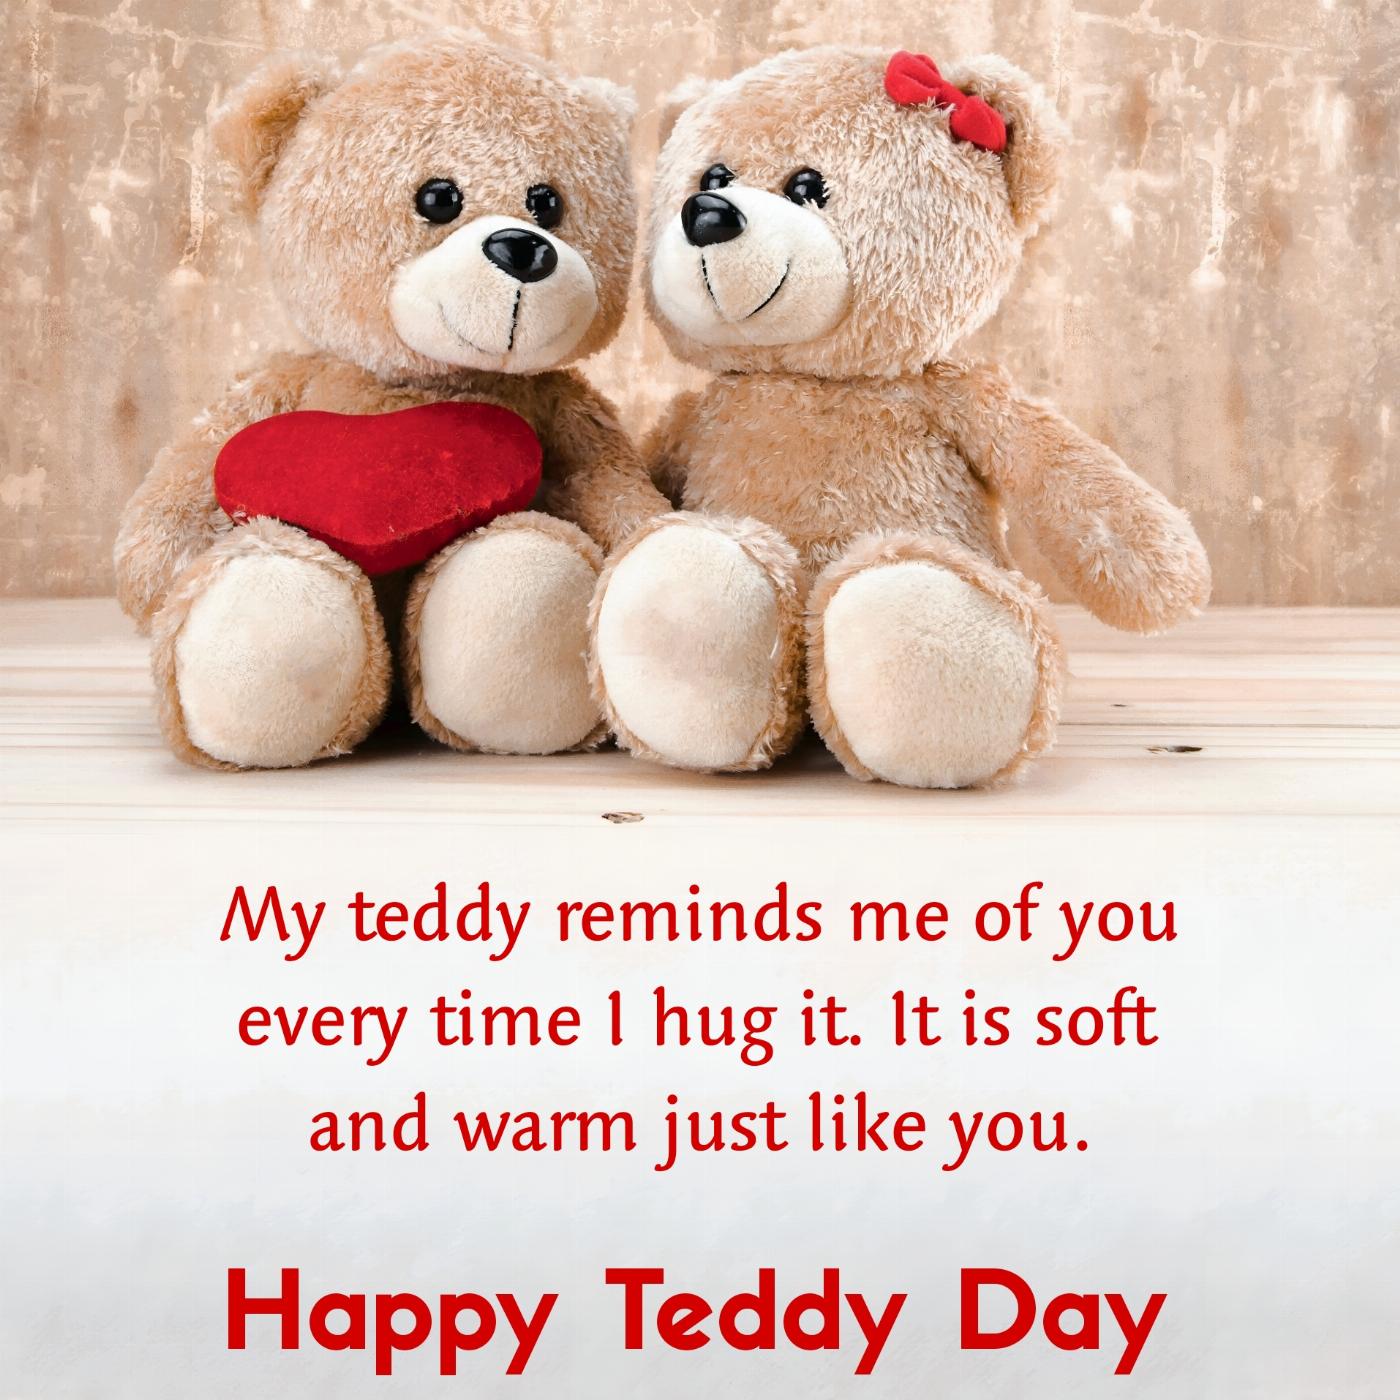 My teddy reminds me of you every time I hug it